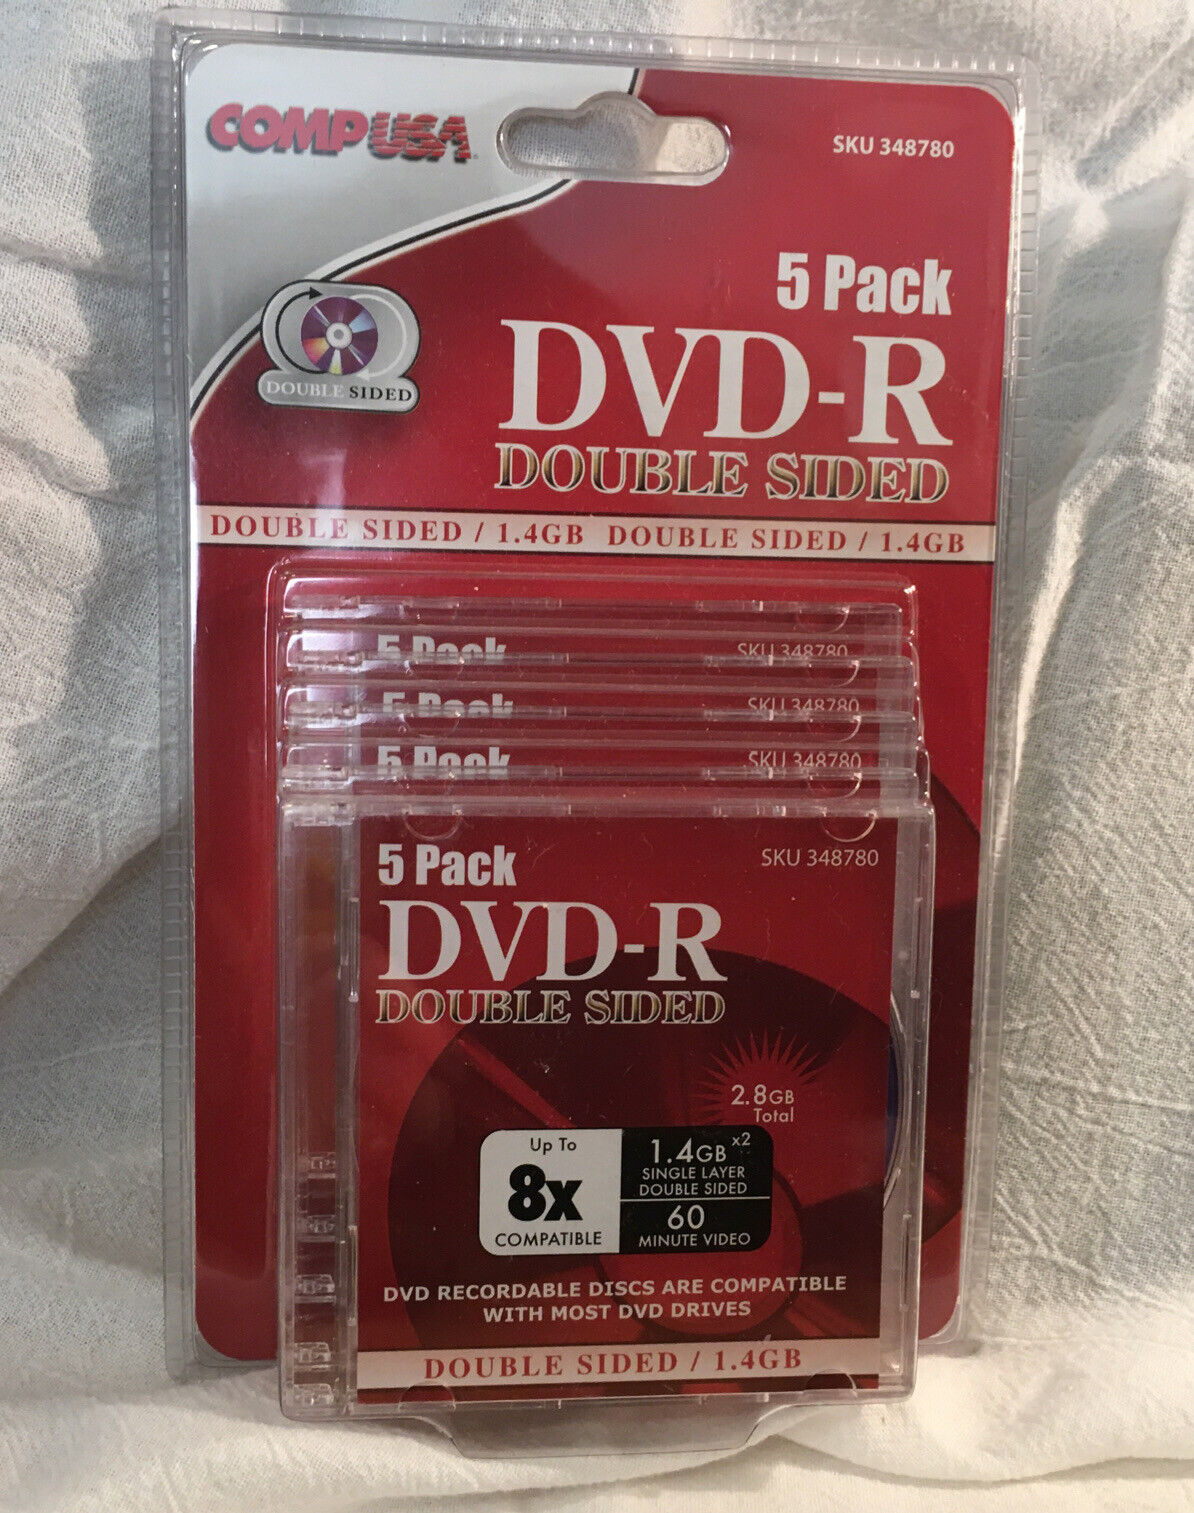 Comp USA 5 Pack DVD-R Double Sided 1.4 Gb Discs New